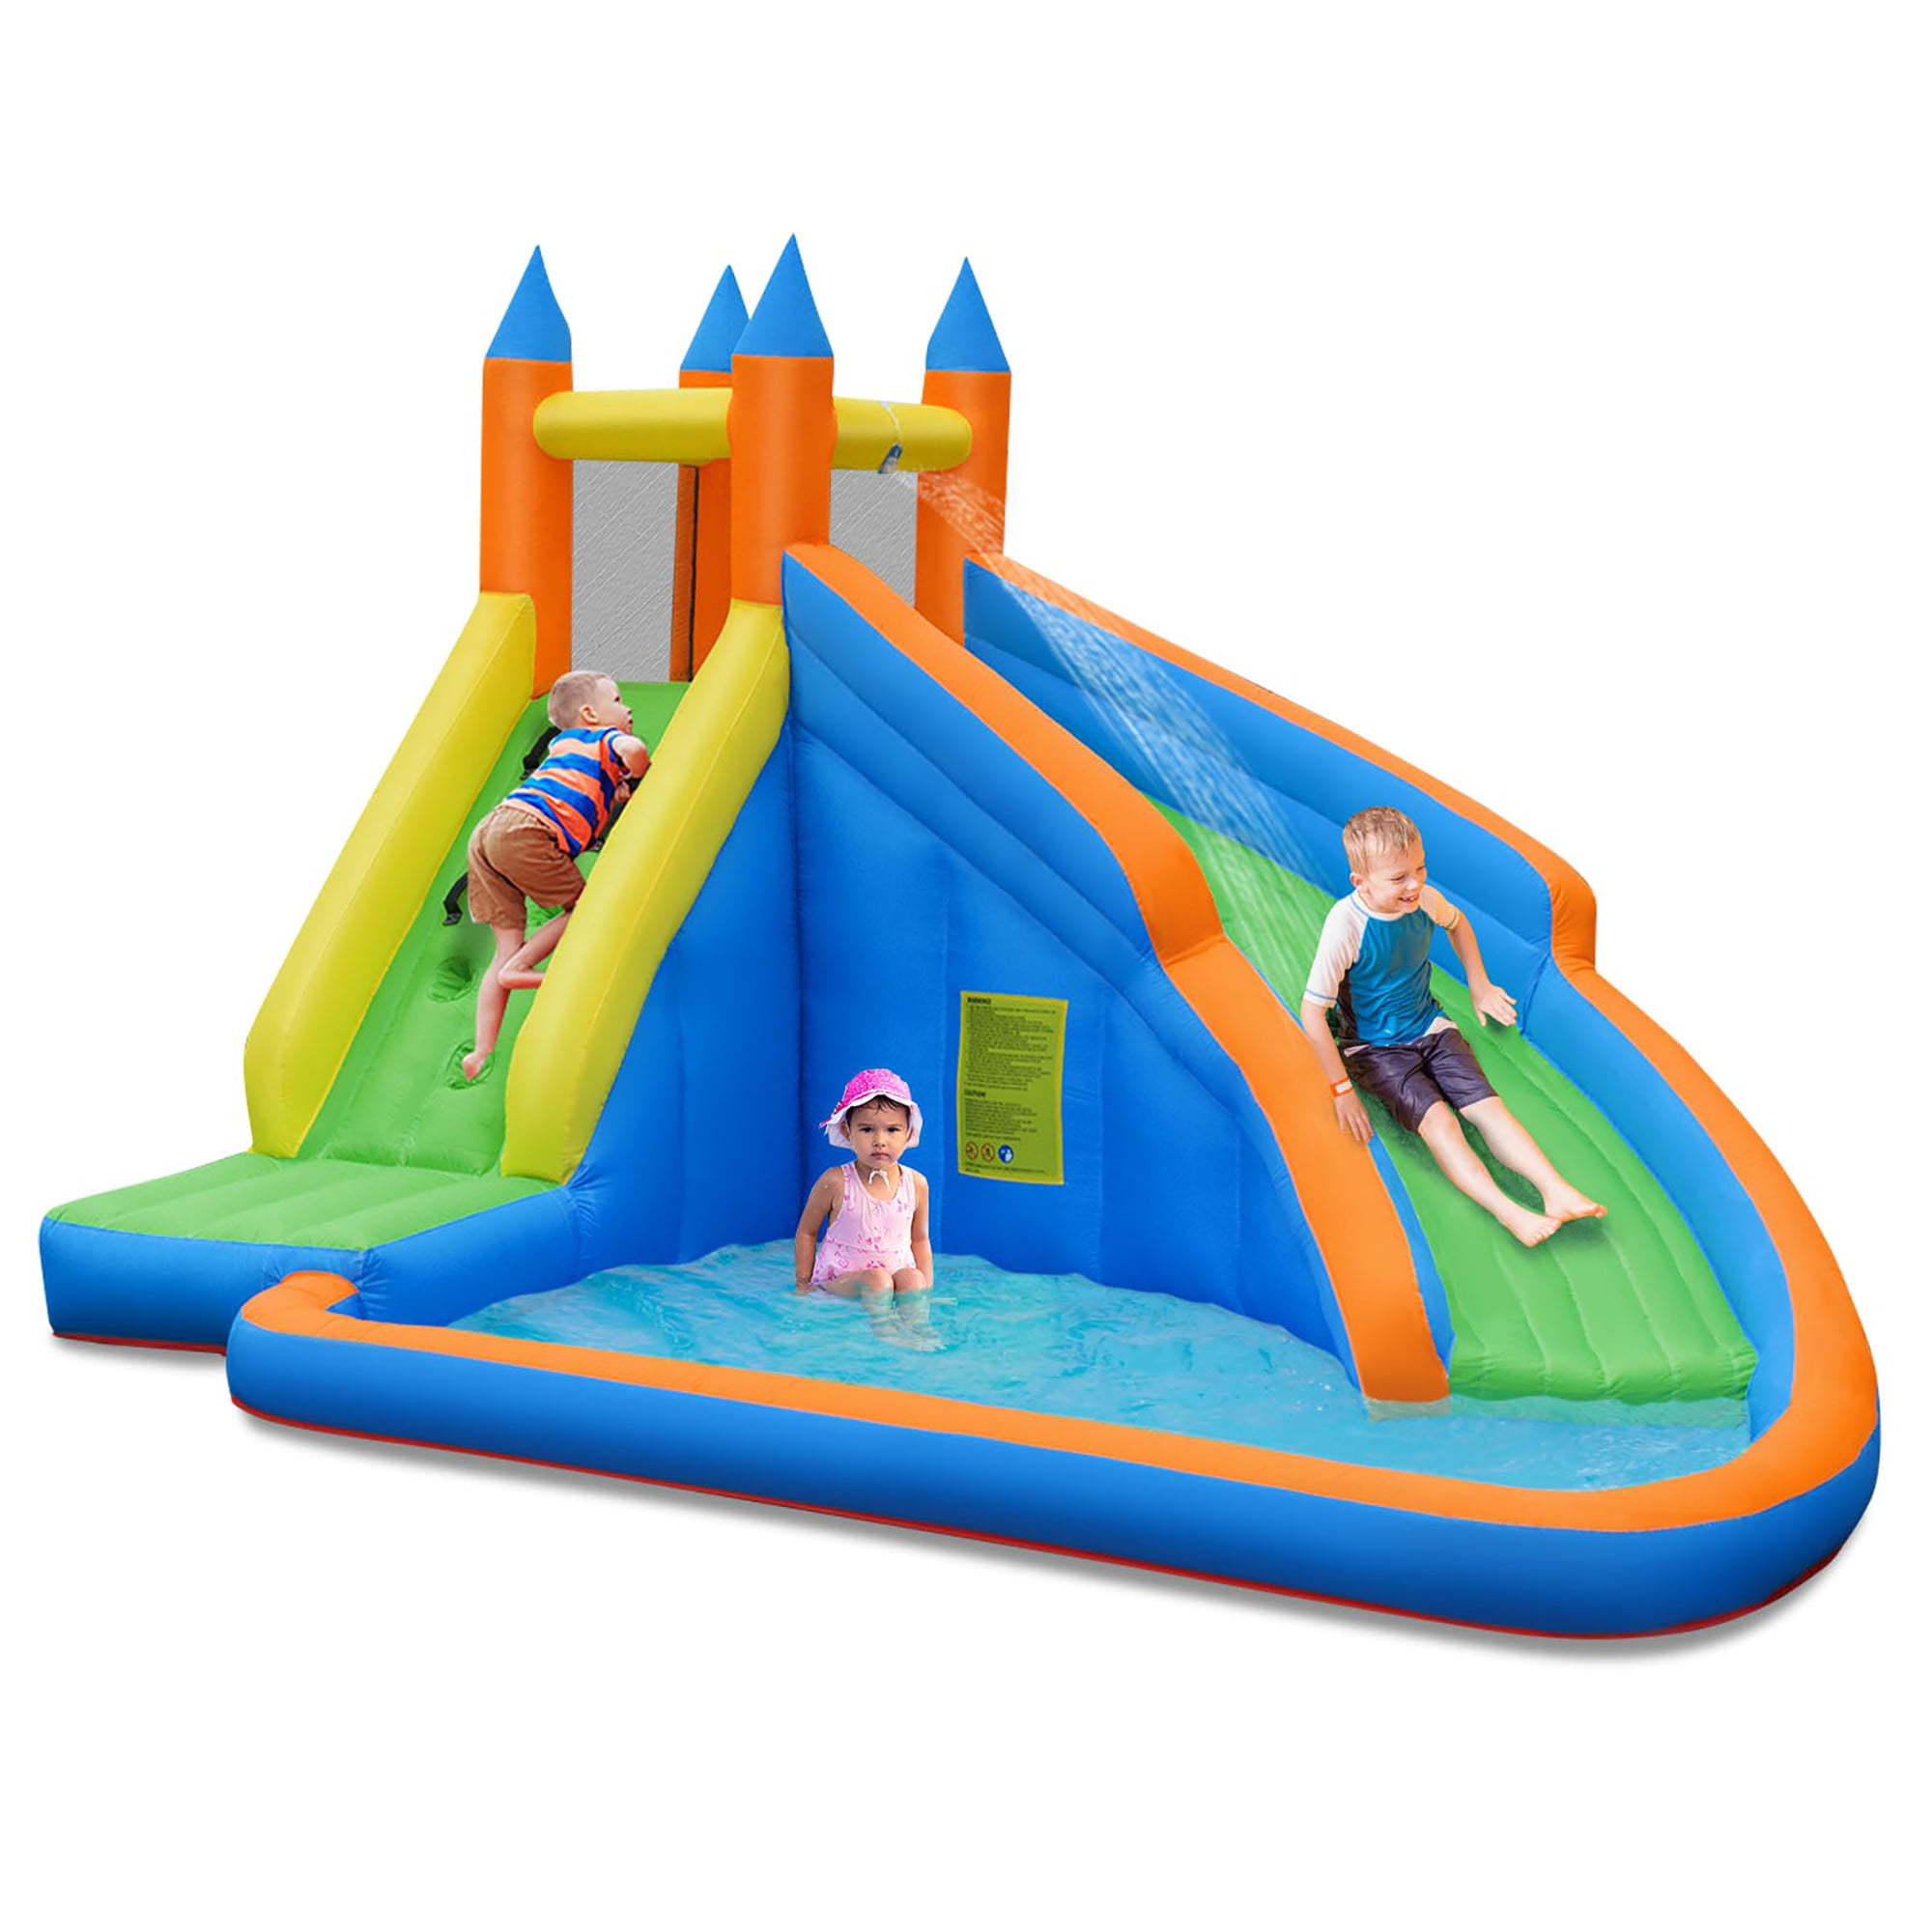 Costway Inflatable Mighty Bounce House Castle w/ Water Slide & Climb Wall $156 + Free Shipping